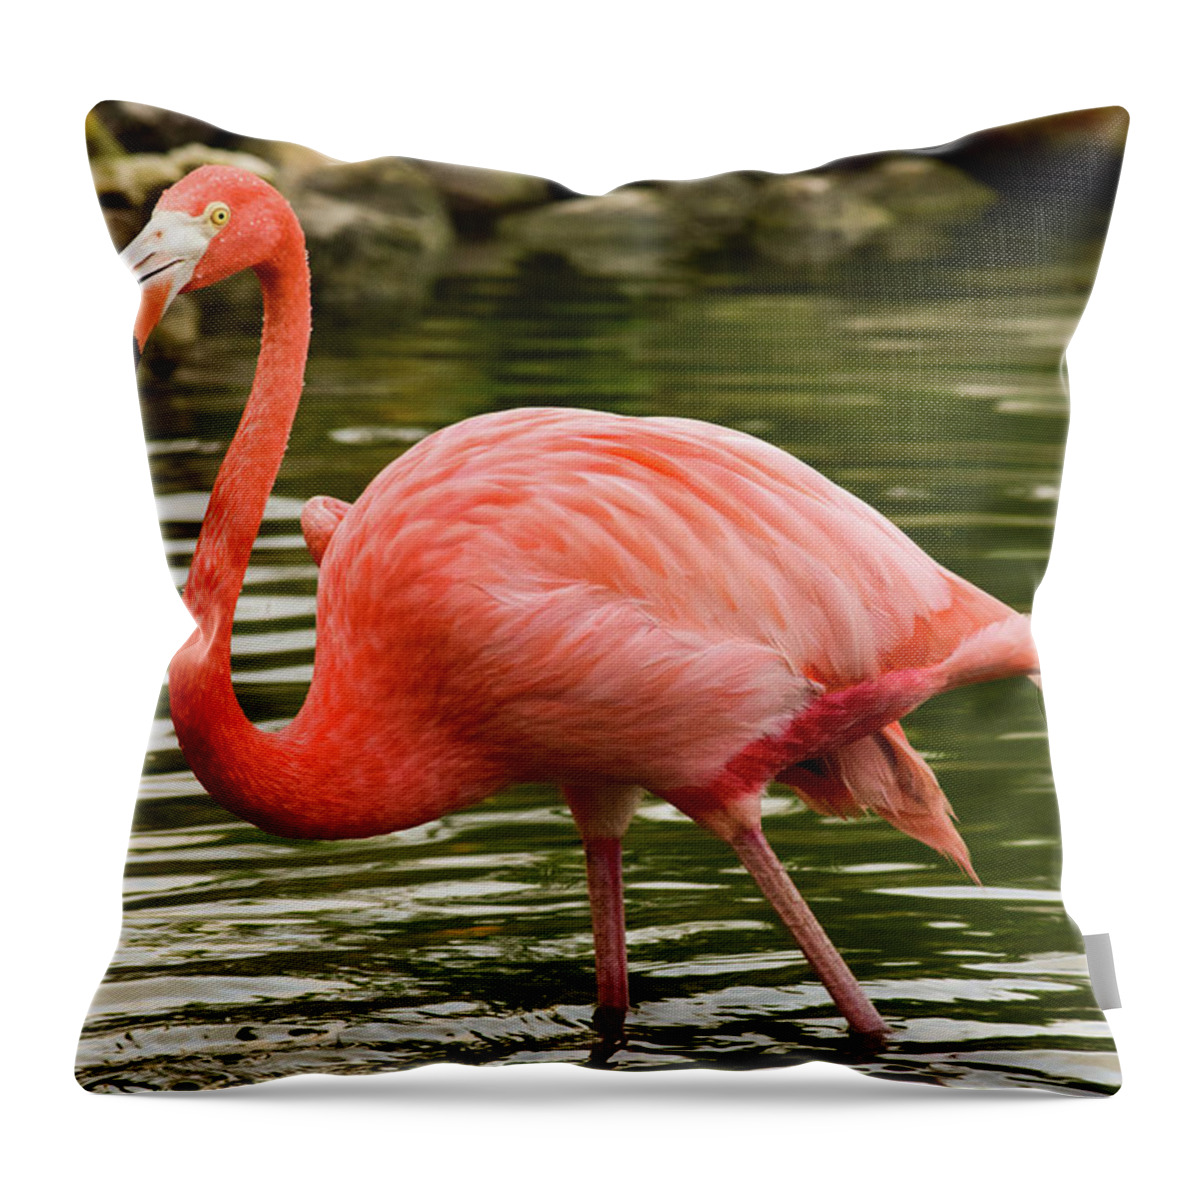 Flamingo Throw Pillow featuring the photograph Flamingo Wades by Nicole Lloyd